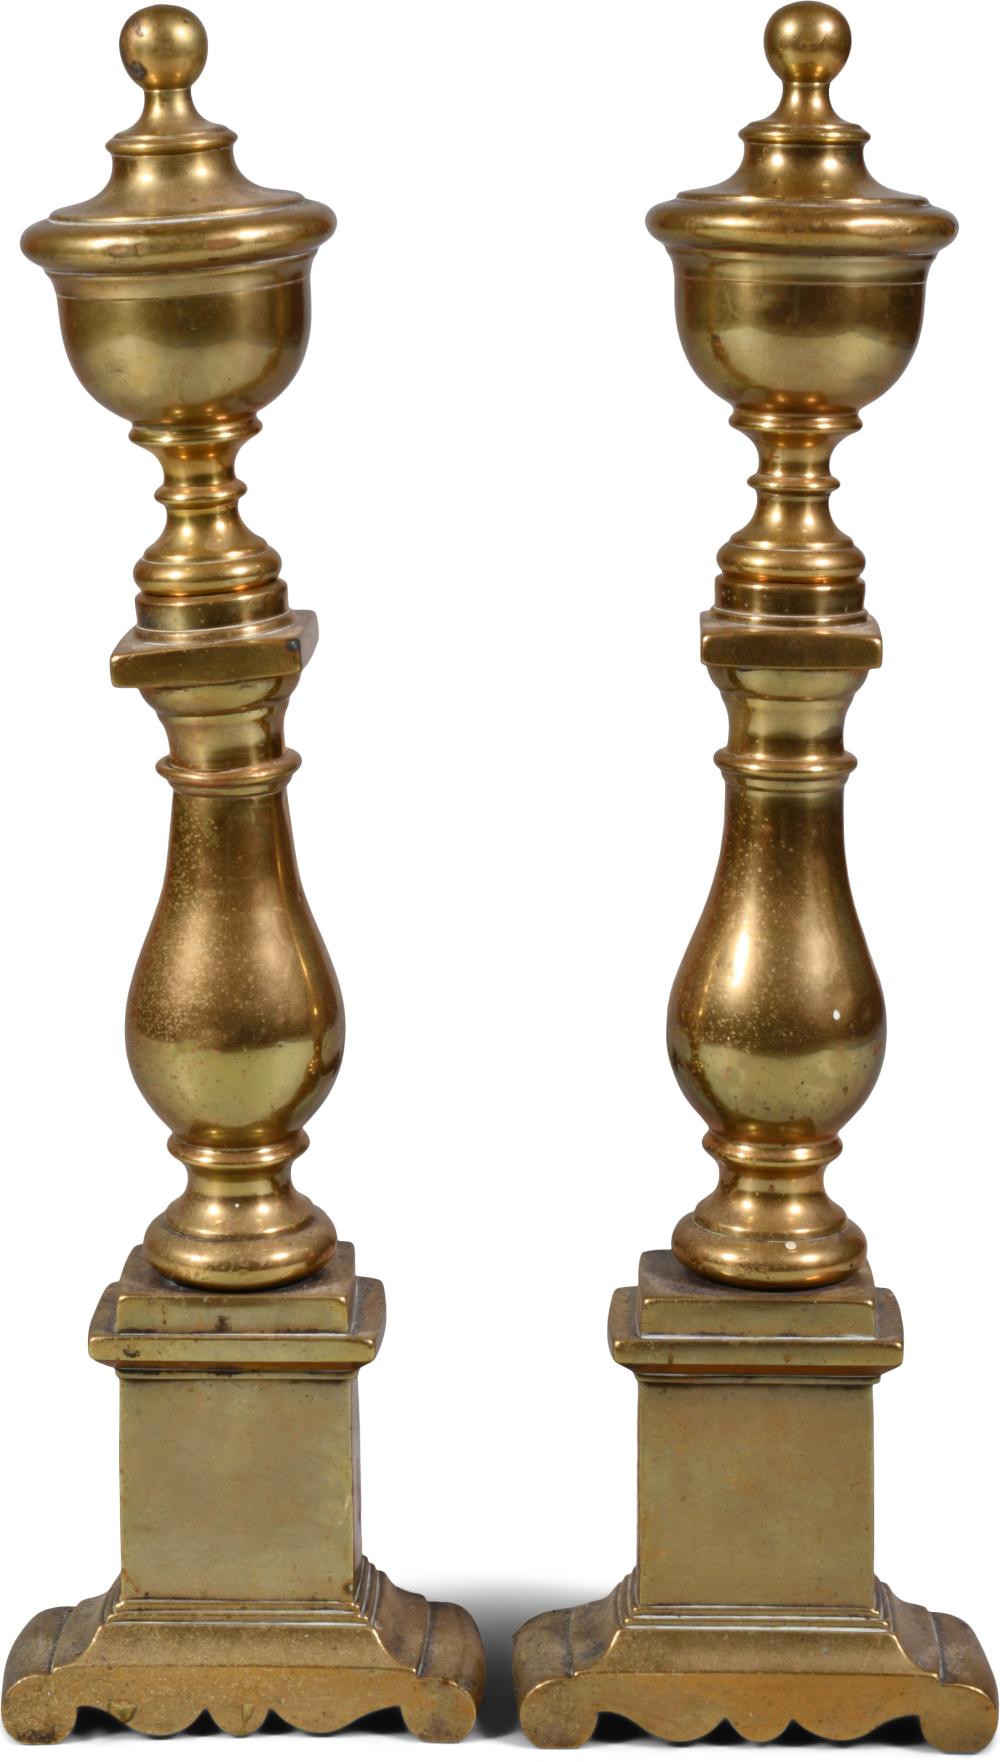 PAIR OF LATE FEDERAL BRASS ANDIRONS  33dbde